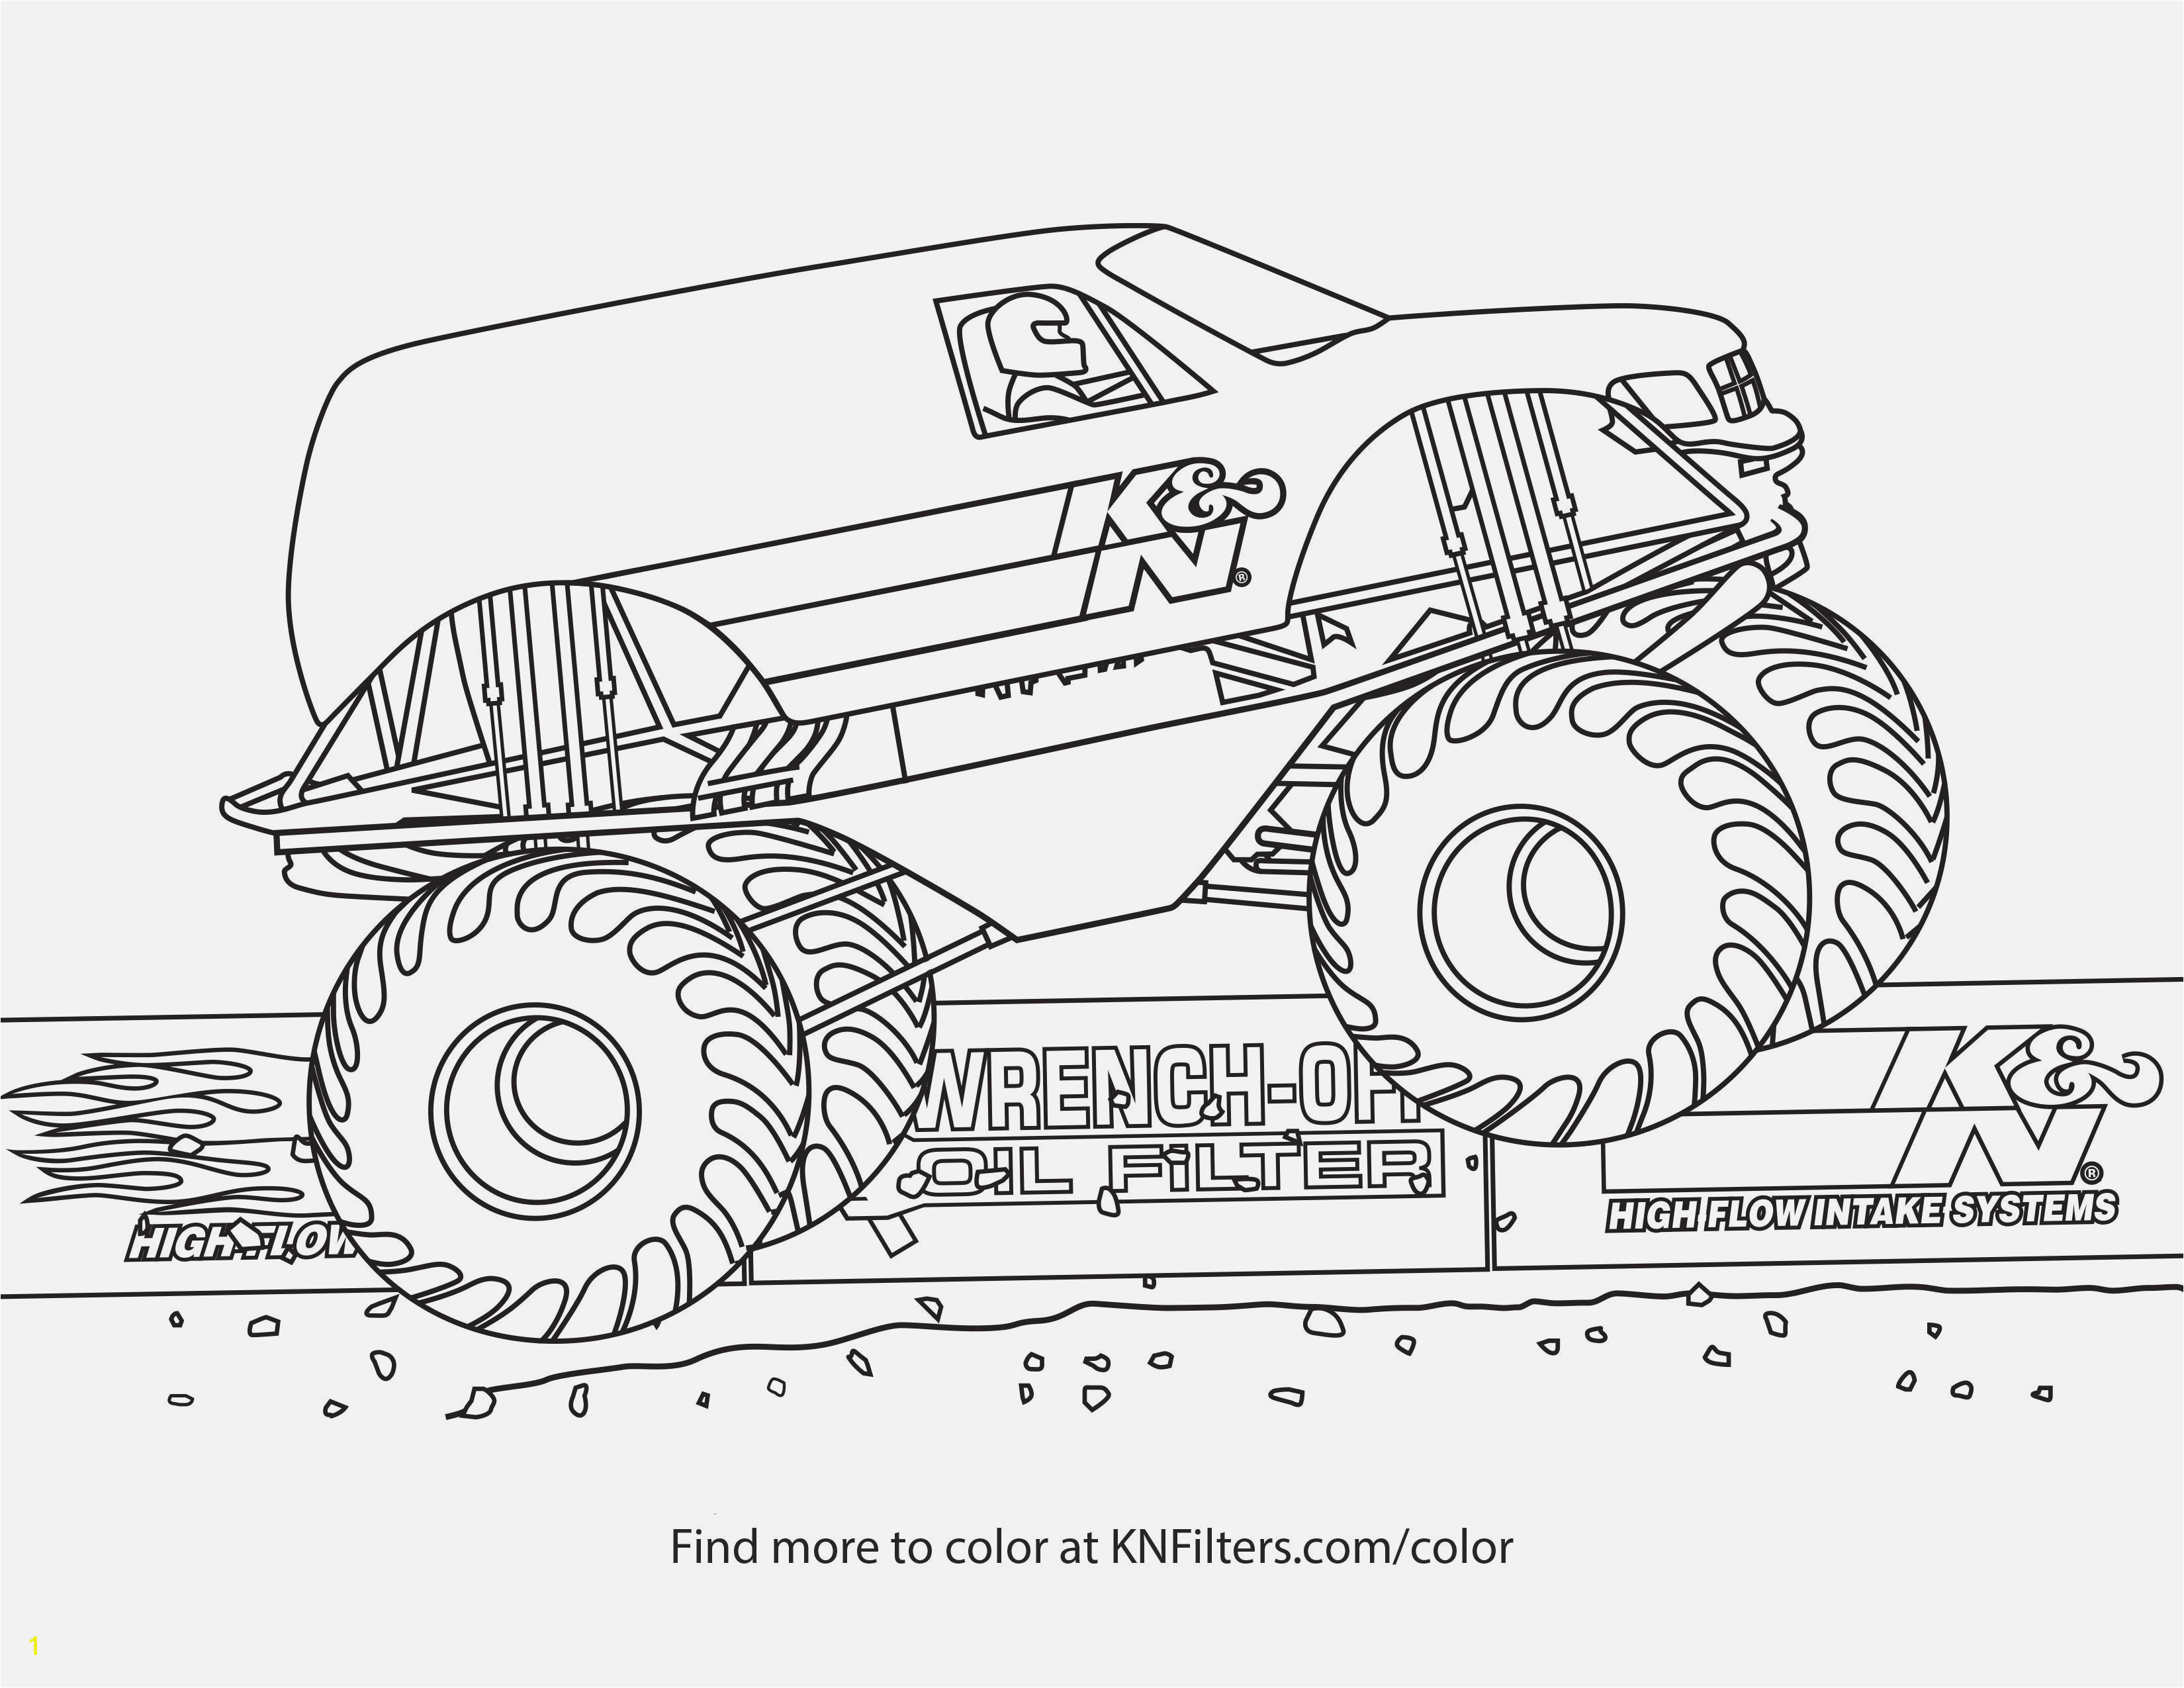 Coloring Pages Monster Trucks Easy and Fun Monster Truck Coloring Pages for Kids K&n Printable Coloring Pages